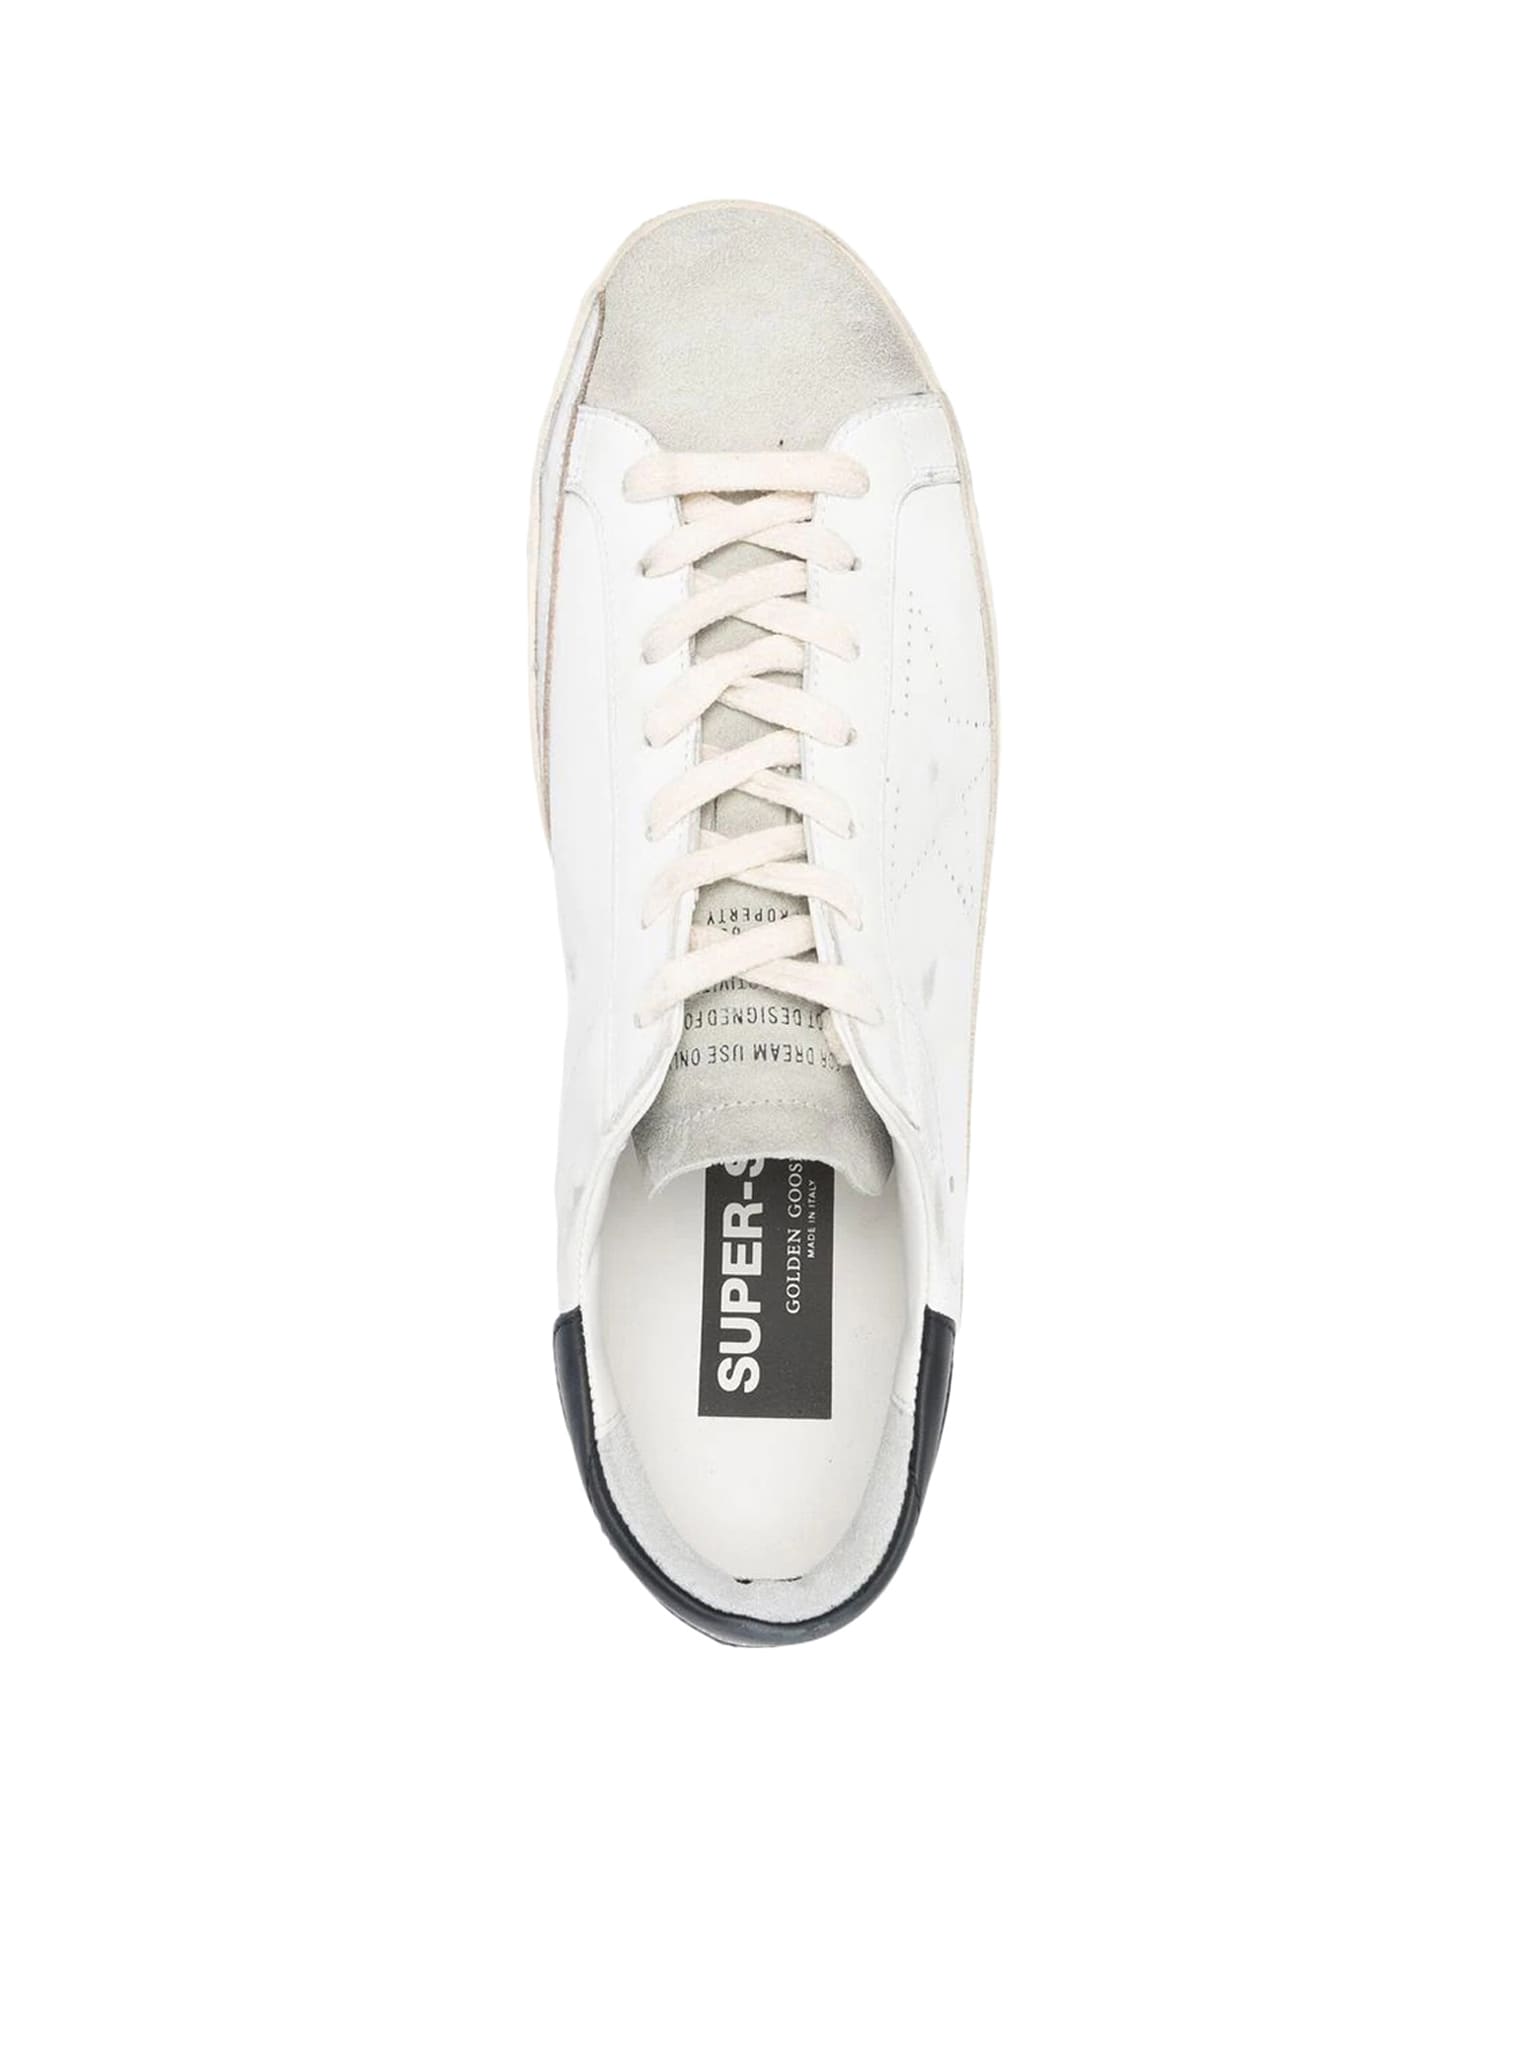 Shop Golden Goose Super-star Leather Upper And Heel Suede Toe Skate Star In White Ice Black